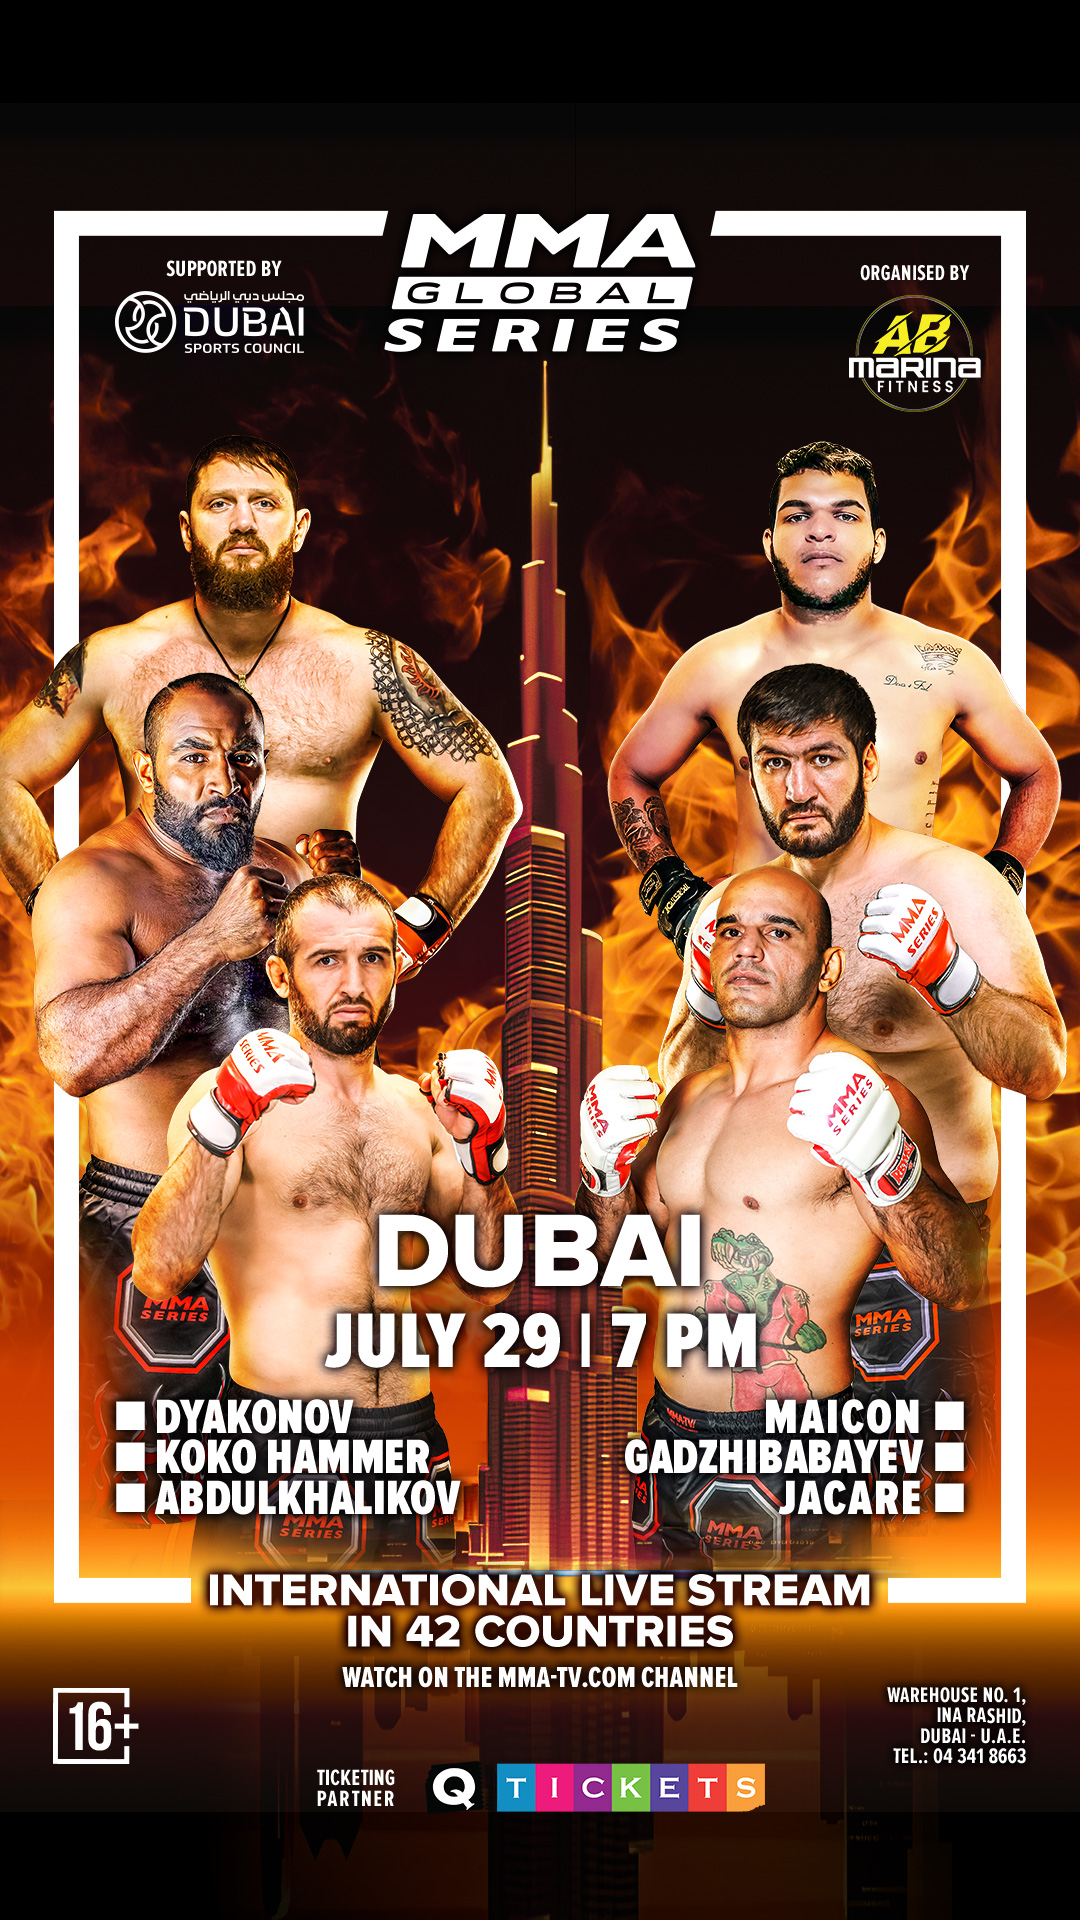 MMA Global Series  MMA Series official website